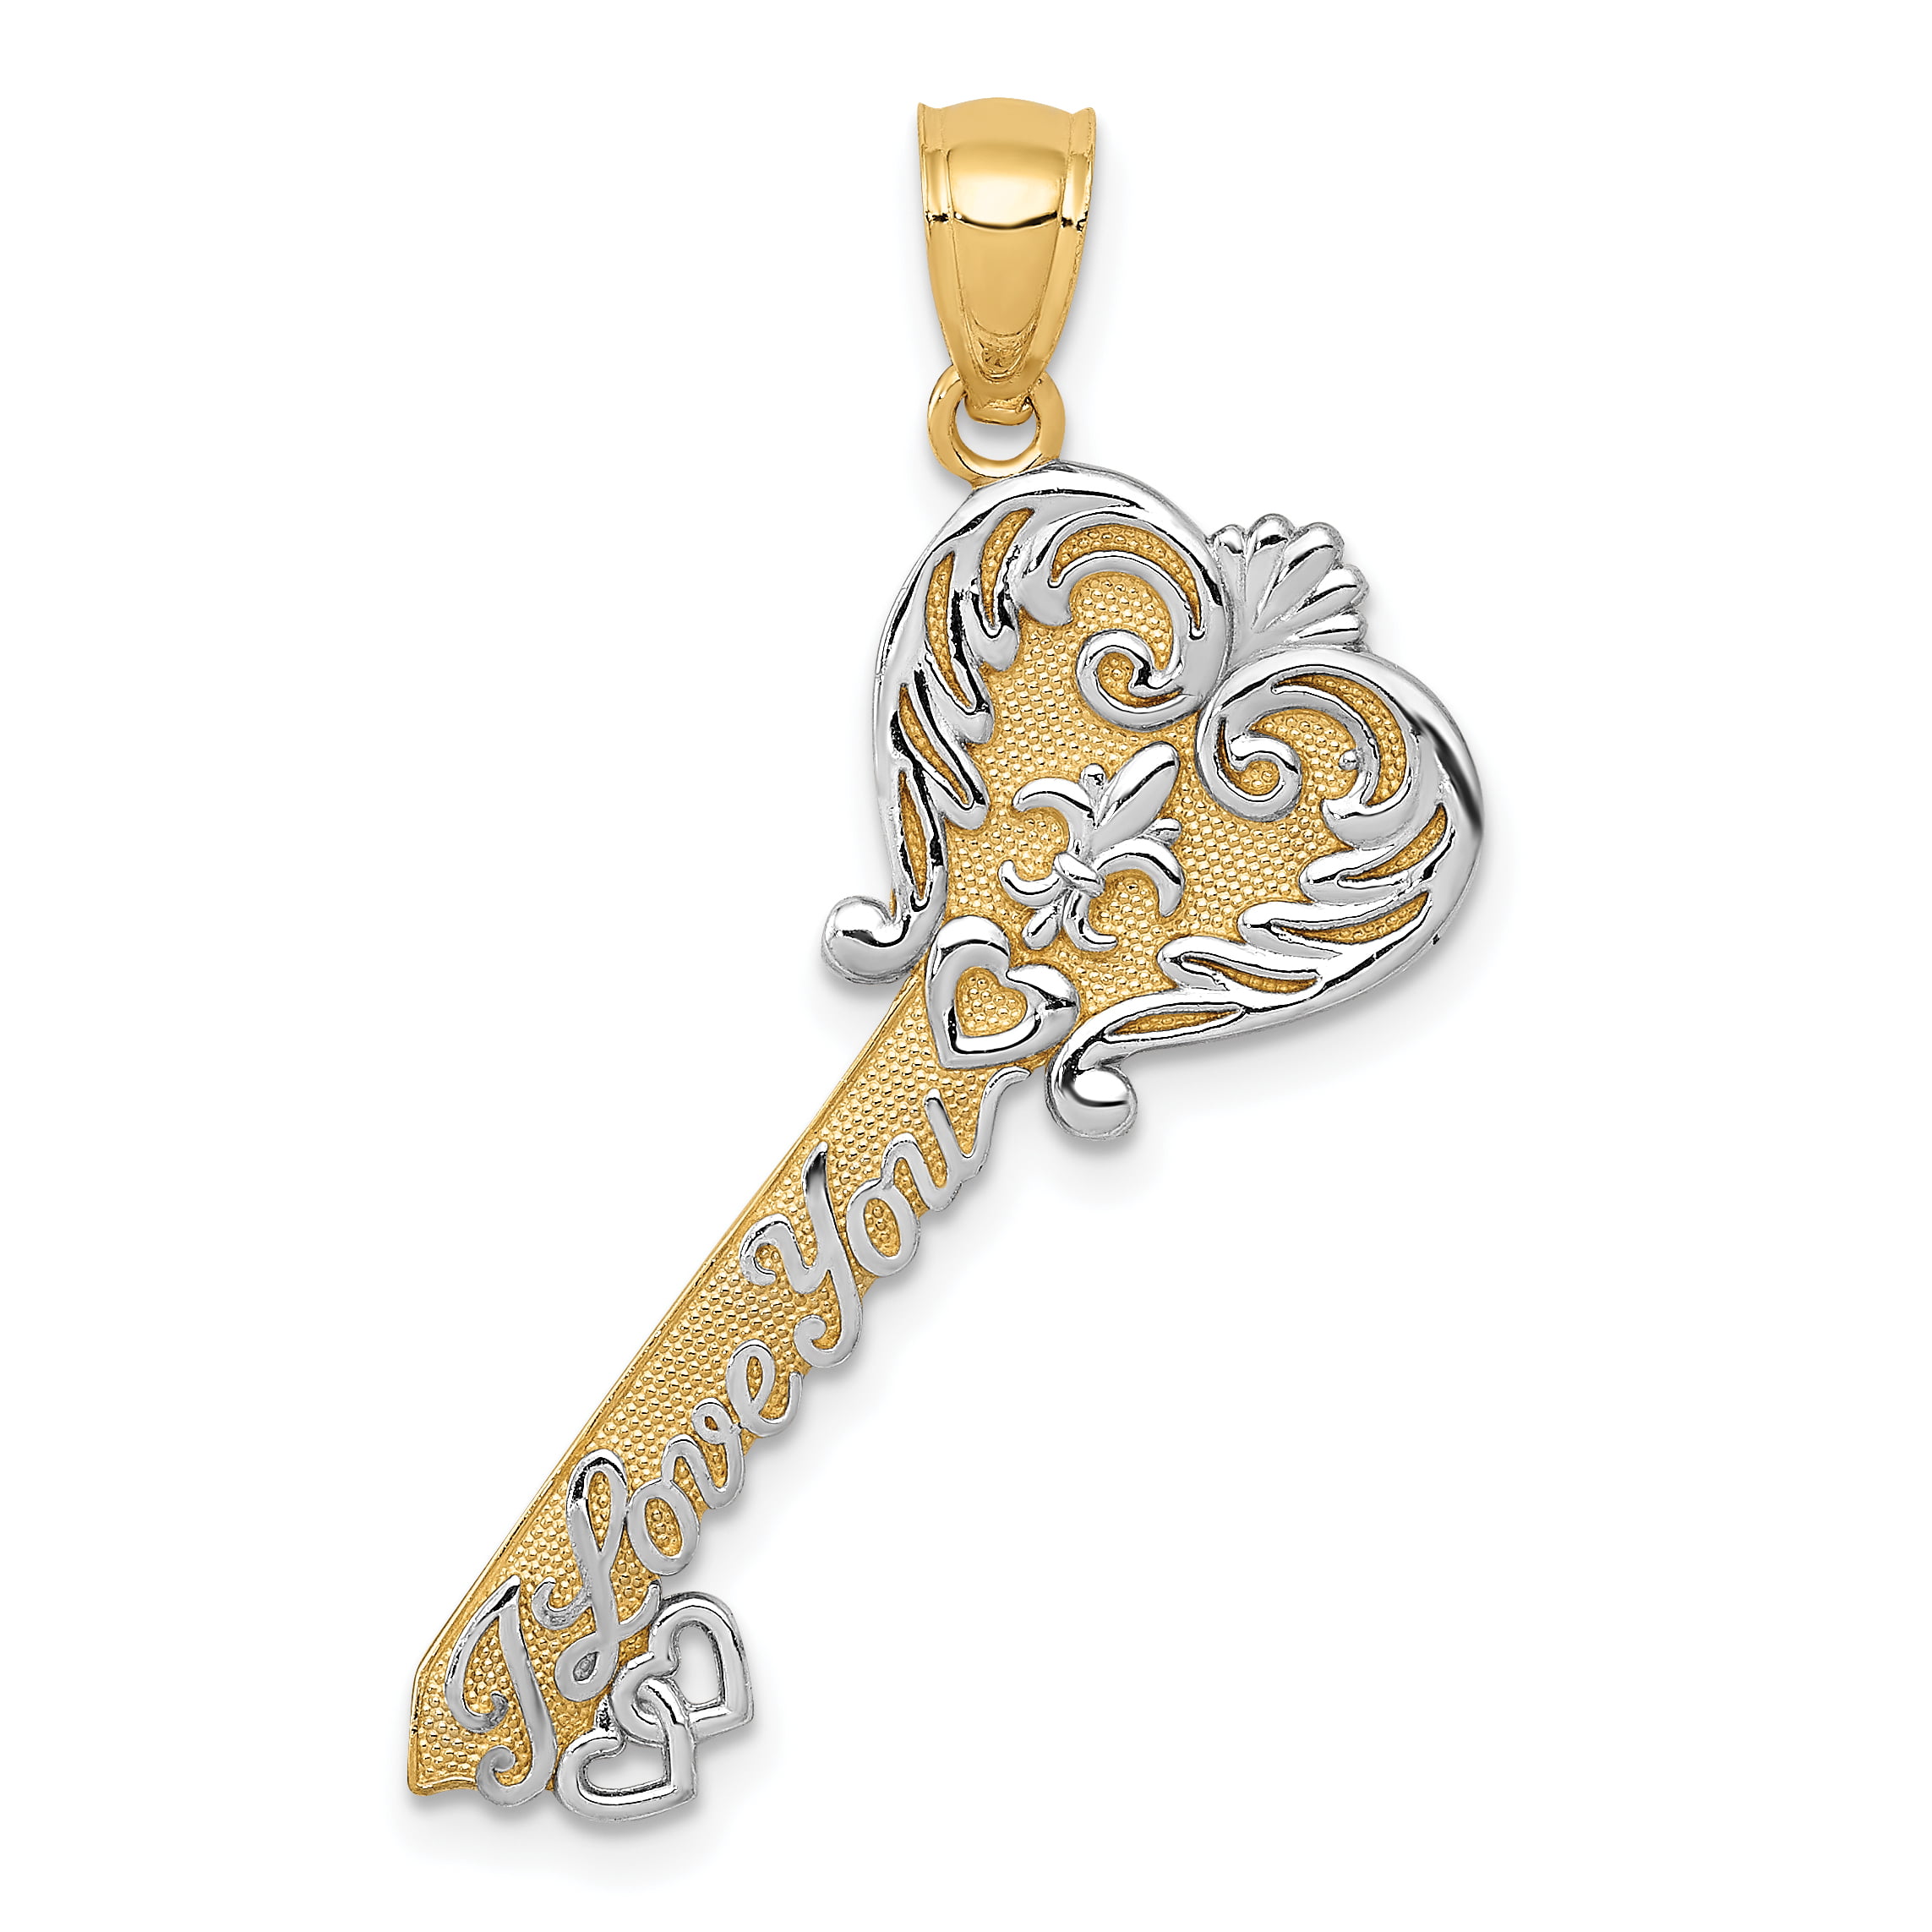 14k Yellow and White Gold Two Tone Heart Key Pendant Necklace